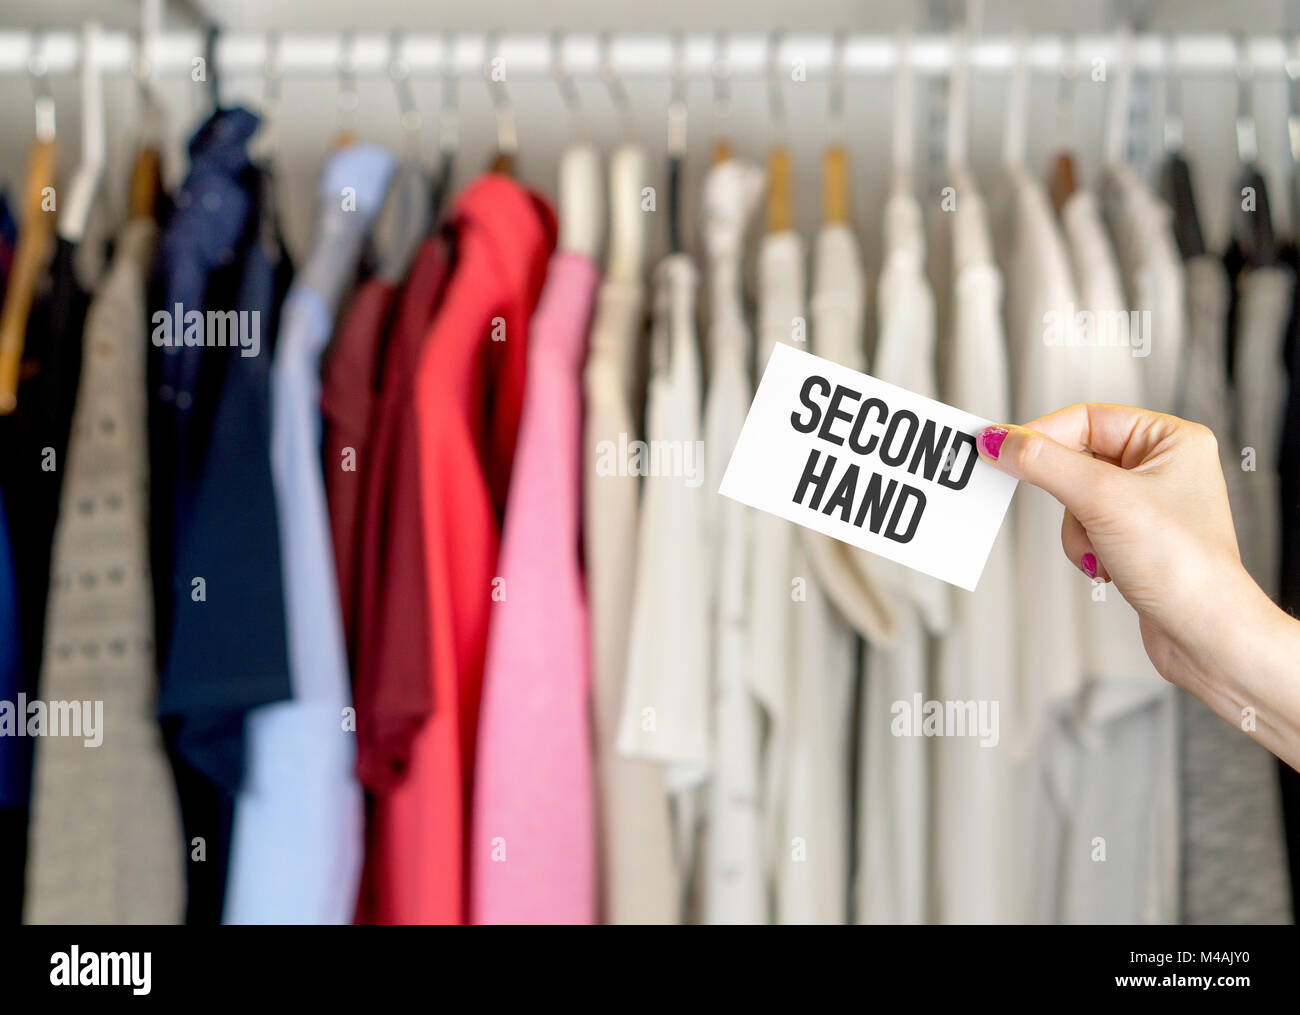 Second hand clothing shop. Stock Photo